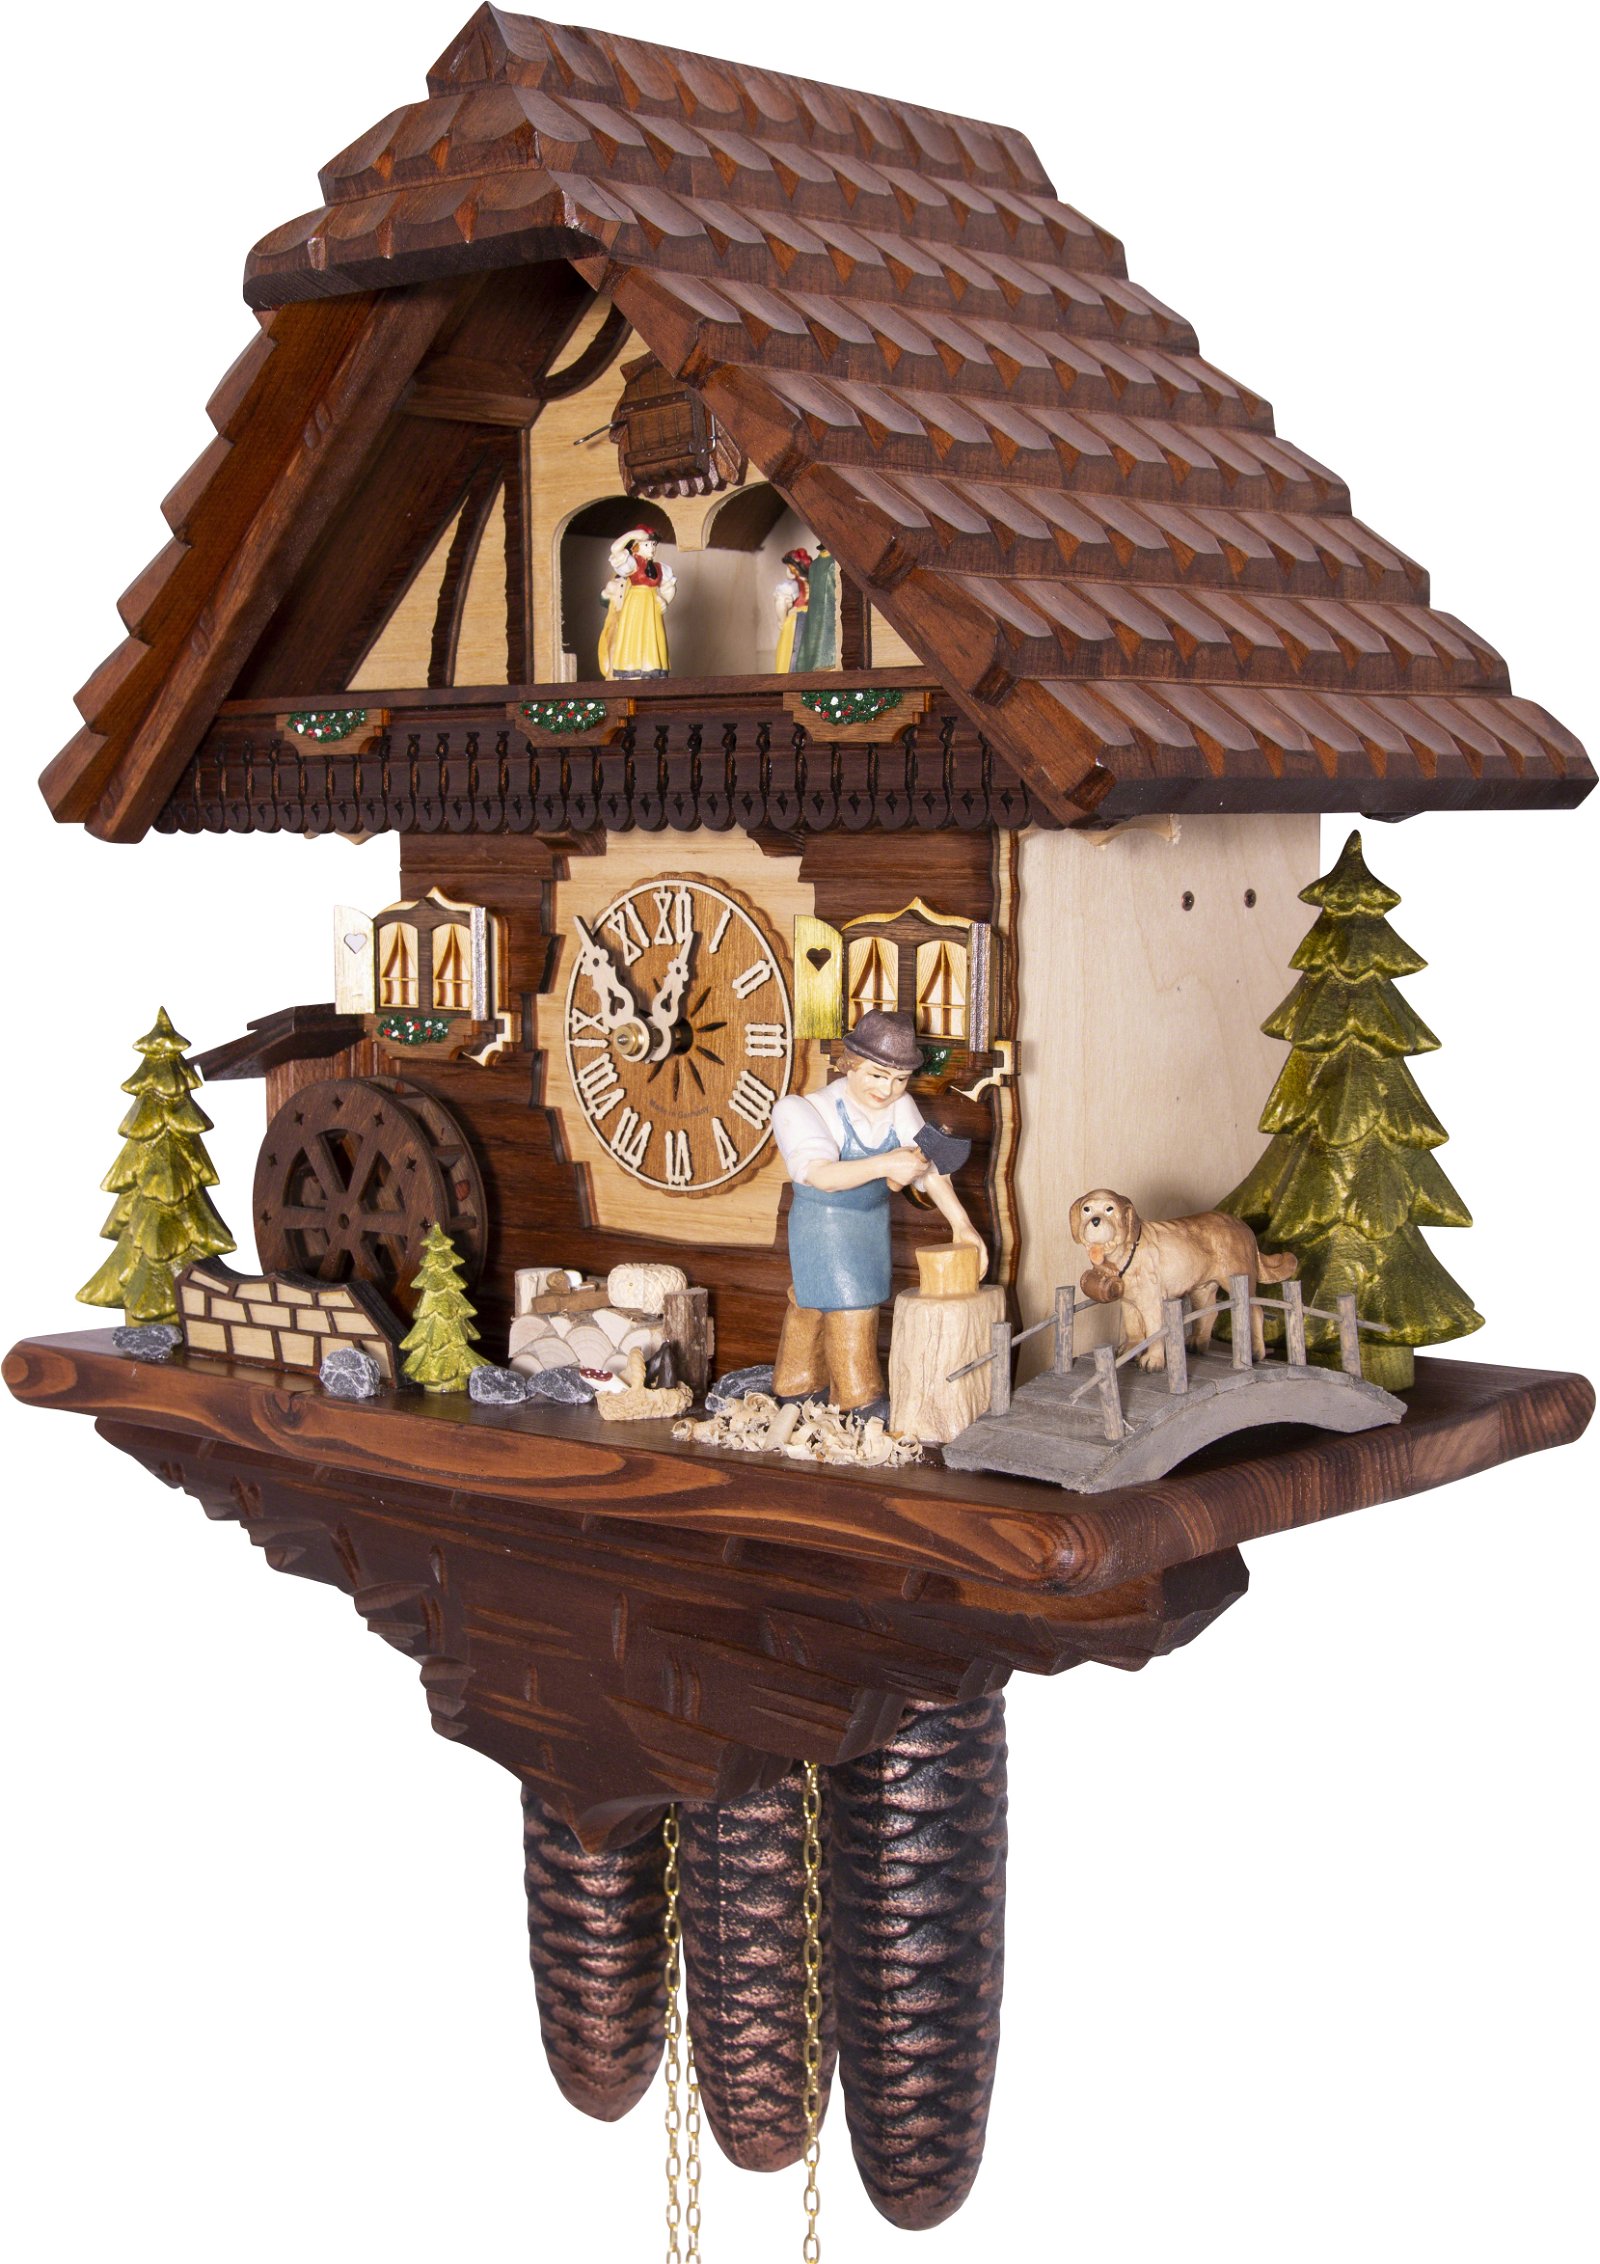 Cuckoo Clock Chalet Style 8 Day Movement 43cm by Hekas